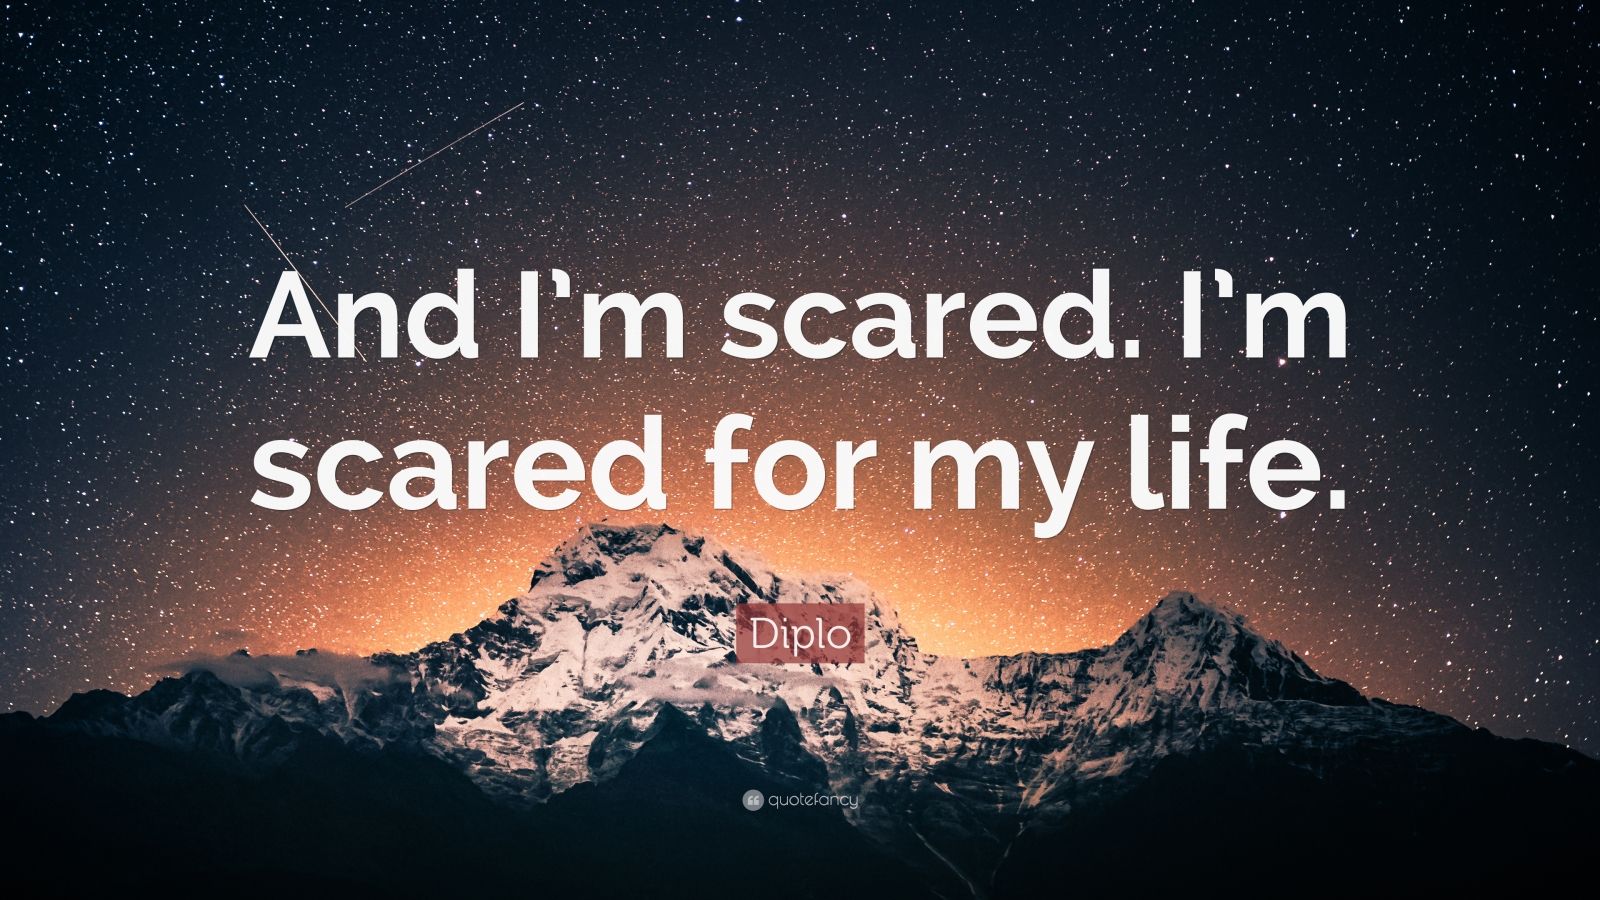 Diplo Quote: “And I’m scared. I’m scared for my life.” (7 wallpapers